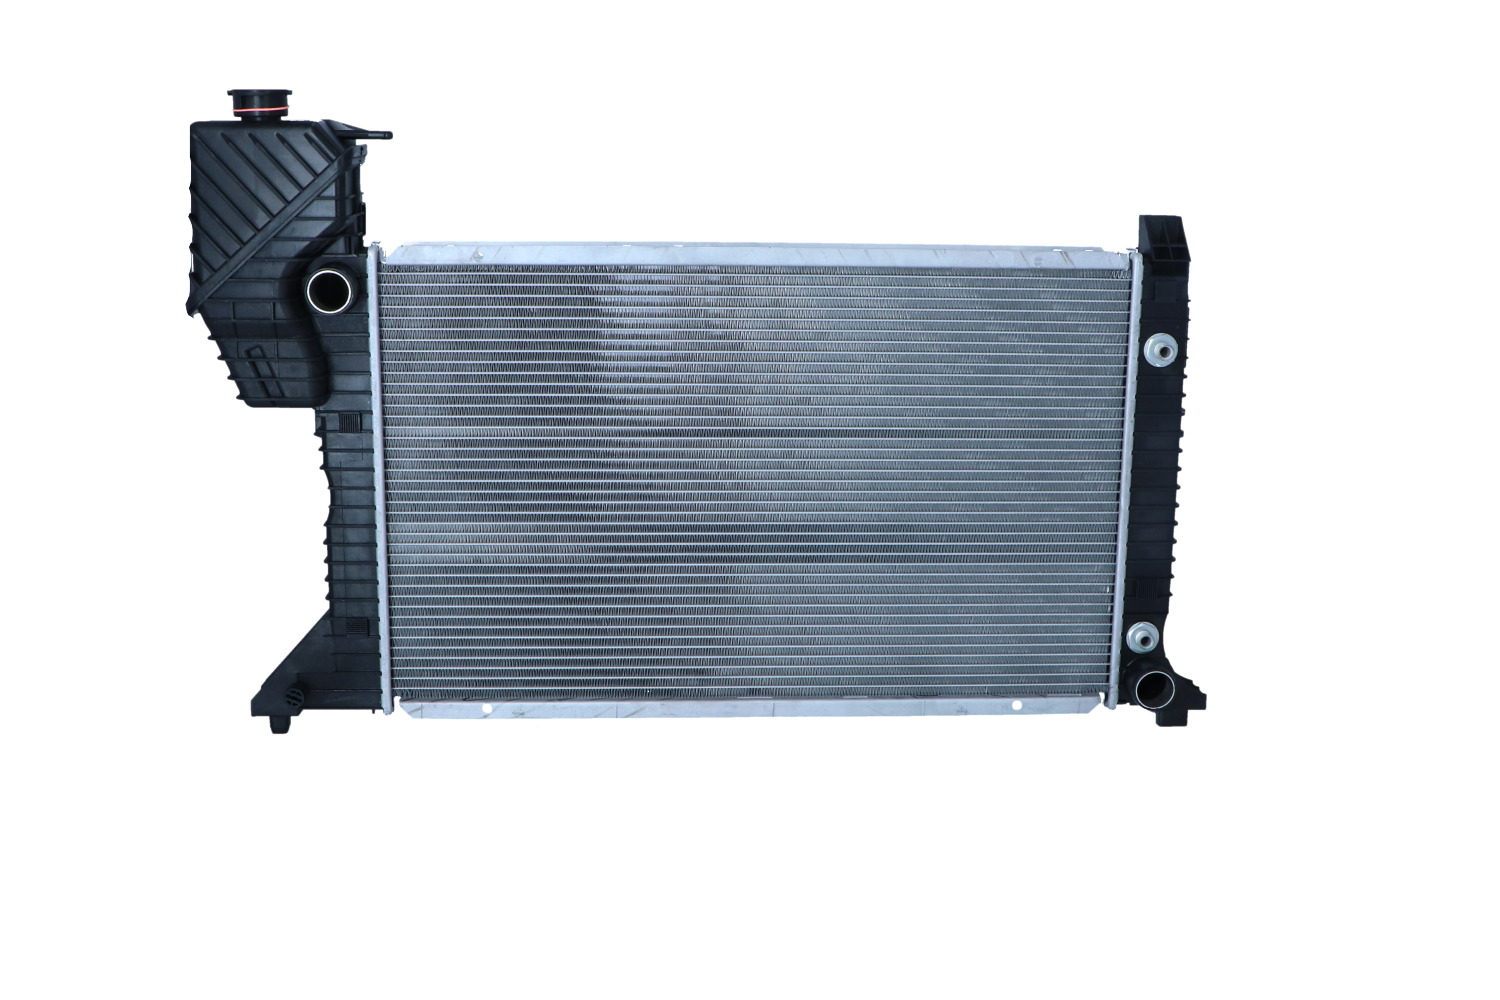 NRF 50574 Engine radiator Aluminium, 680 x 408 x 40 mm, with mounting parts, Brazed cooling fins